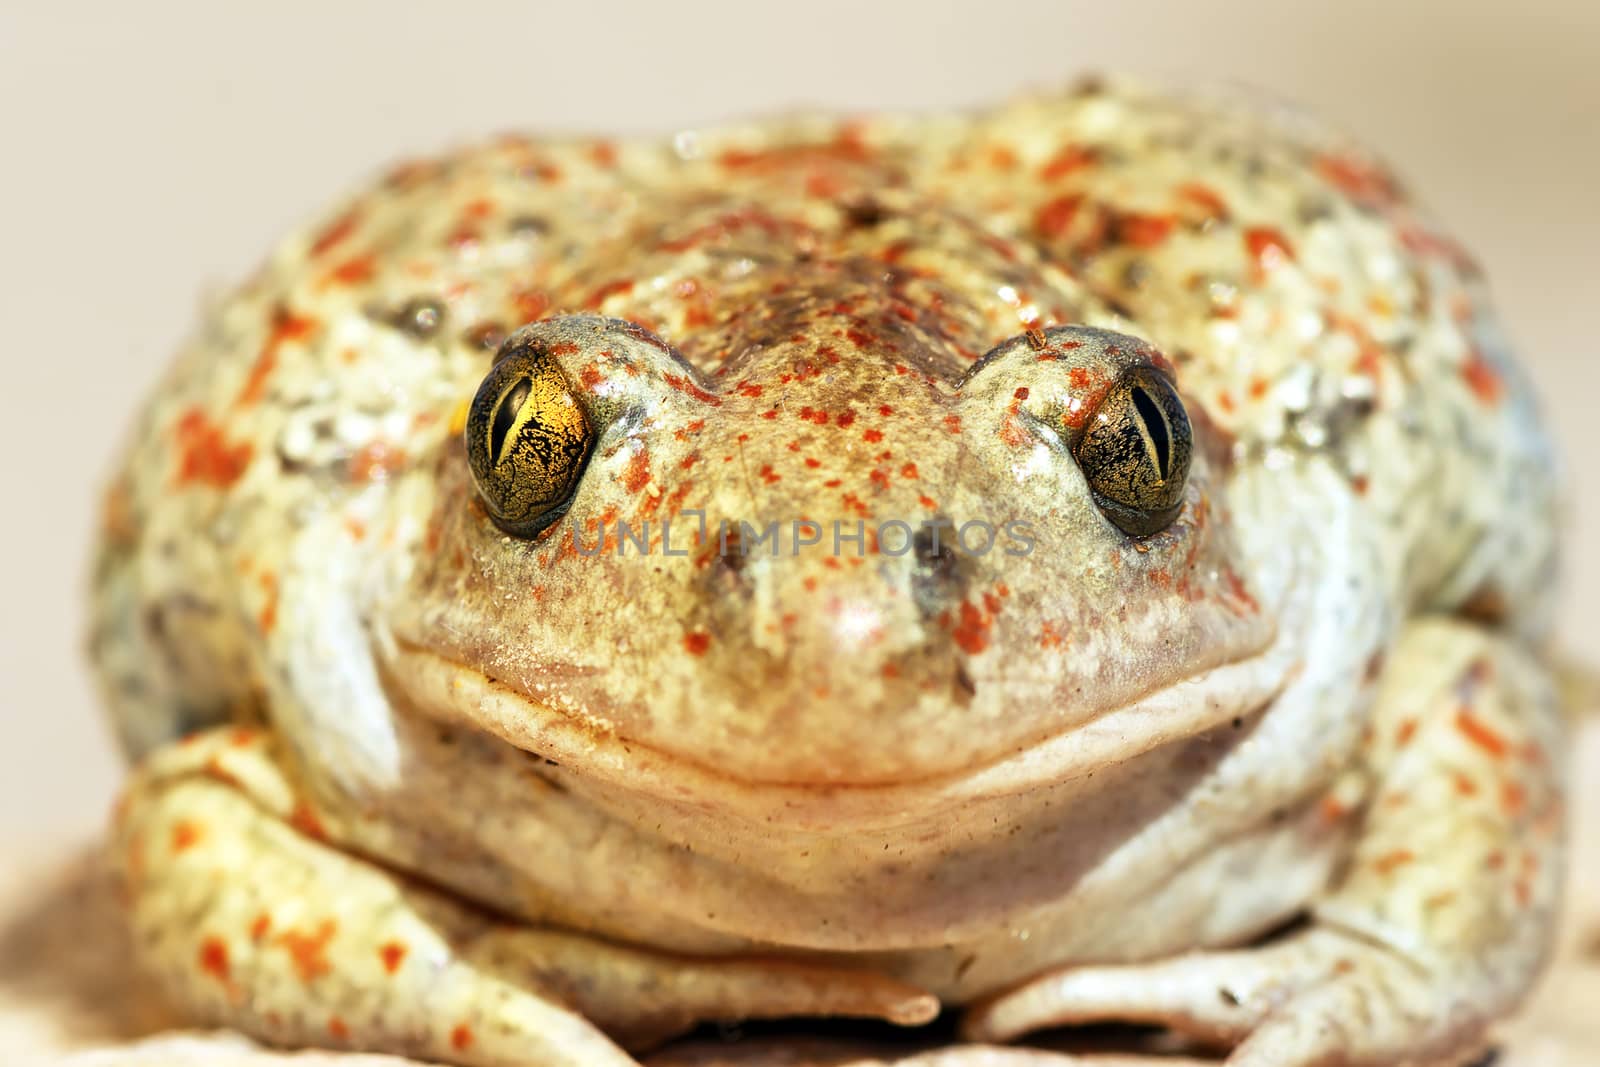 garlic toad beautiful portrait, wild animal looking at the camera ( Pelobates fuscus, common spadefoot toad )